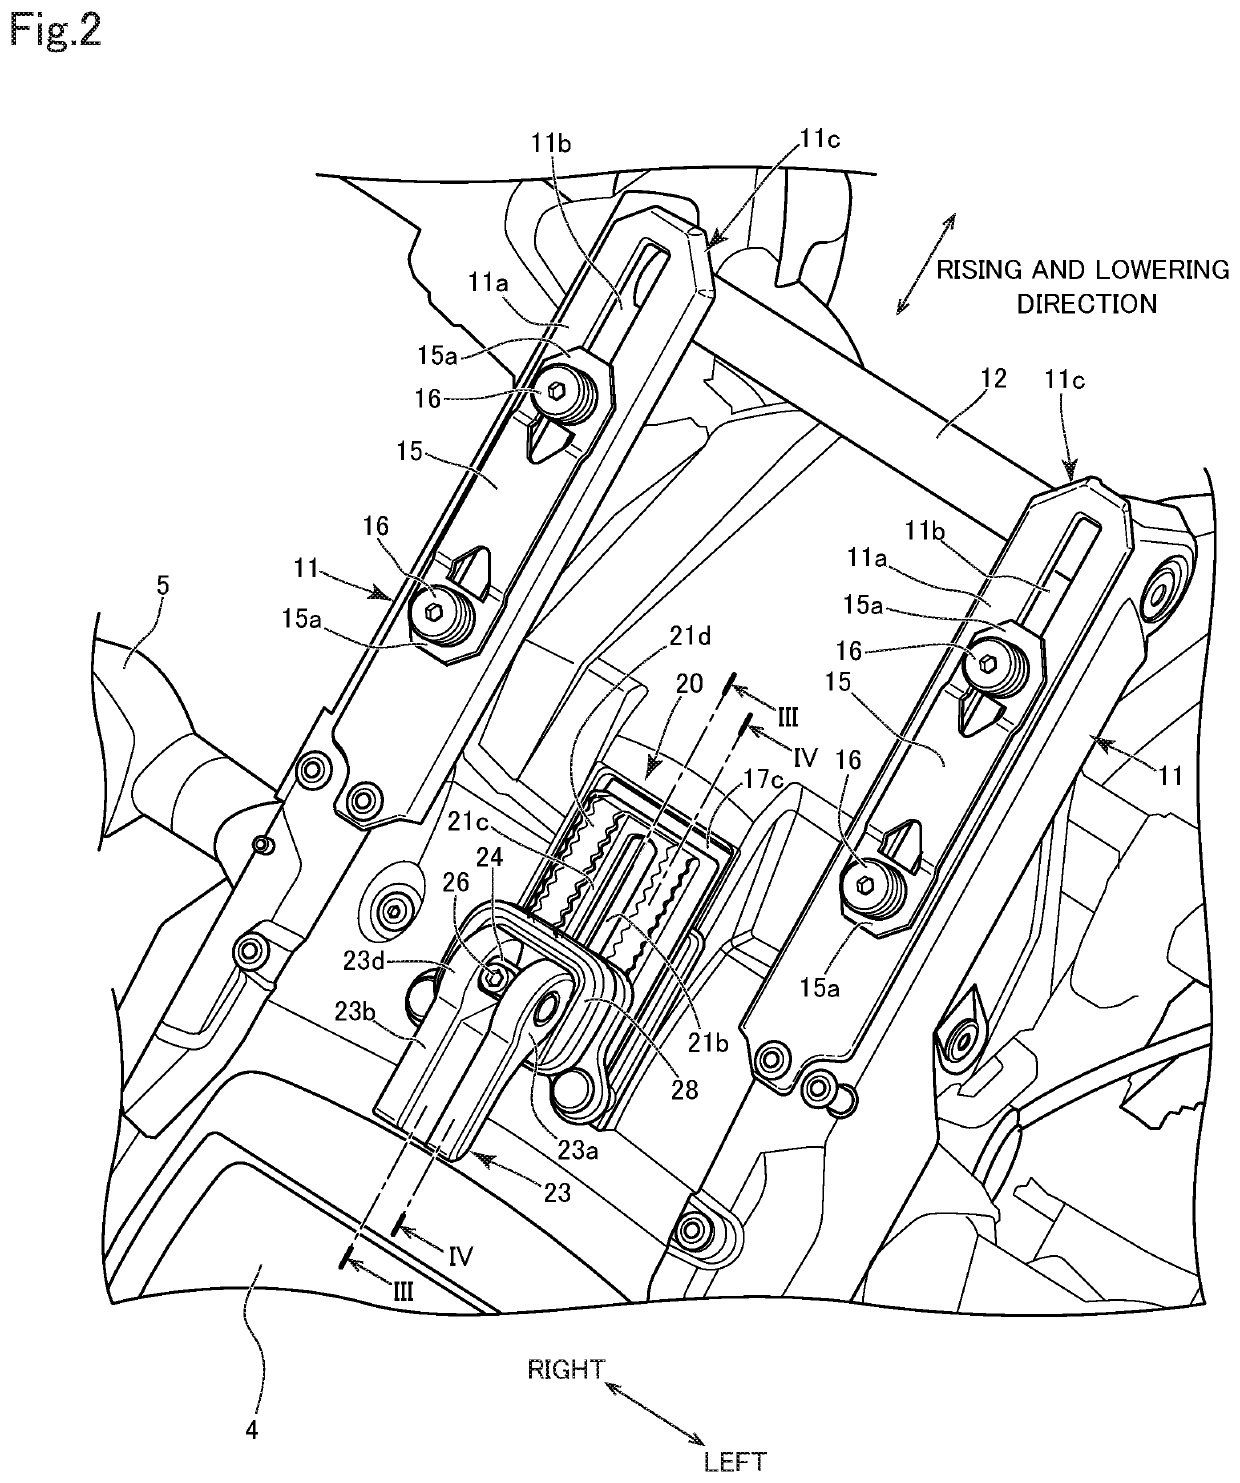 Windshield device for vehicle